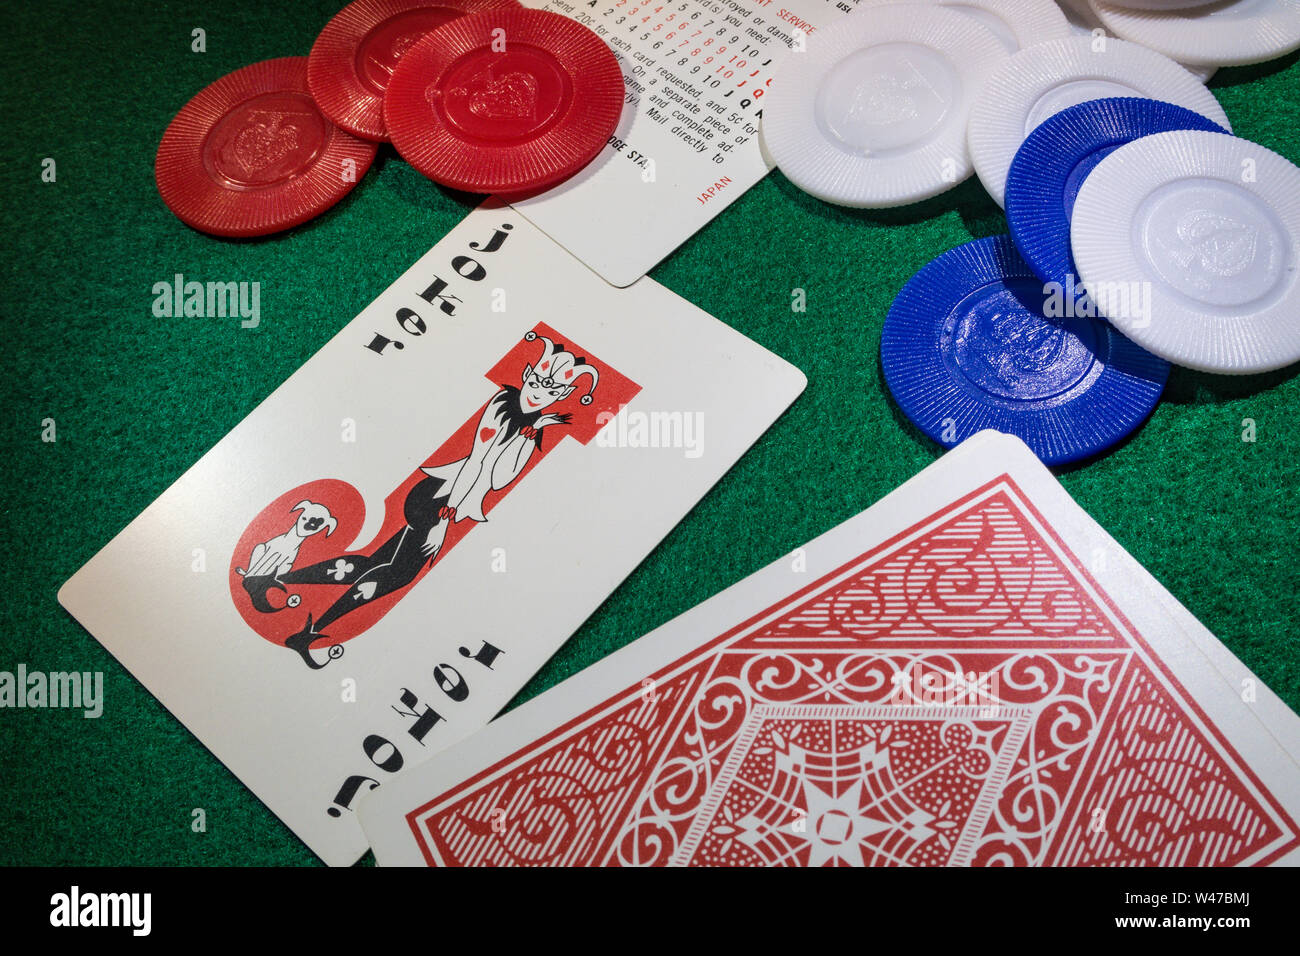 Joker Card, Chips and Down Cards on a Green Felt card Table, USA Stock Photo